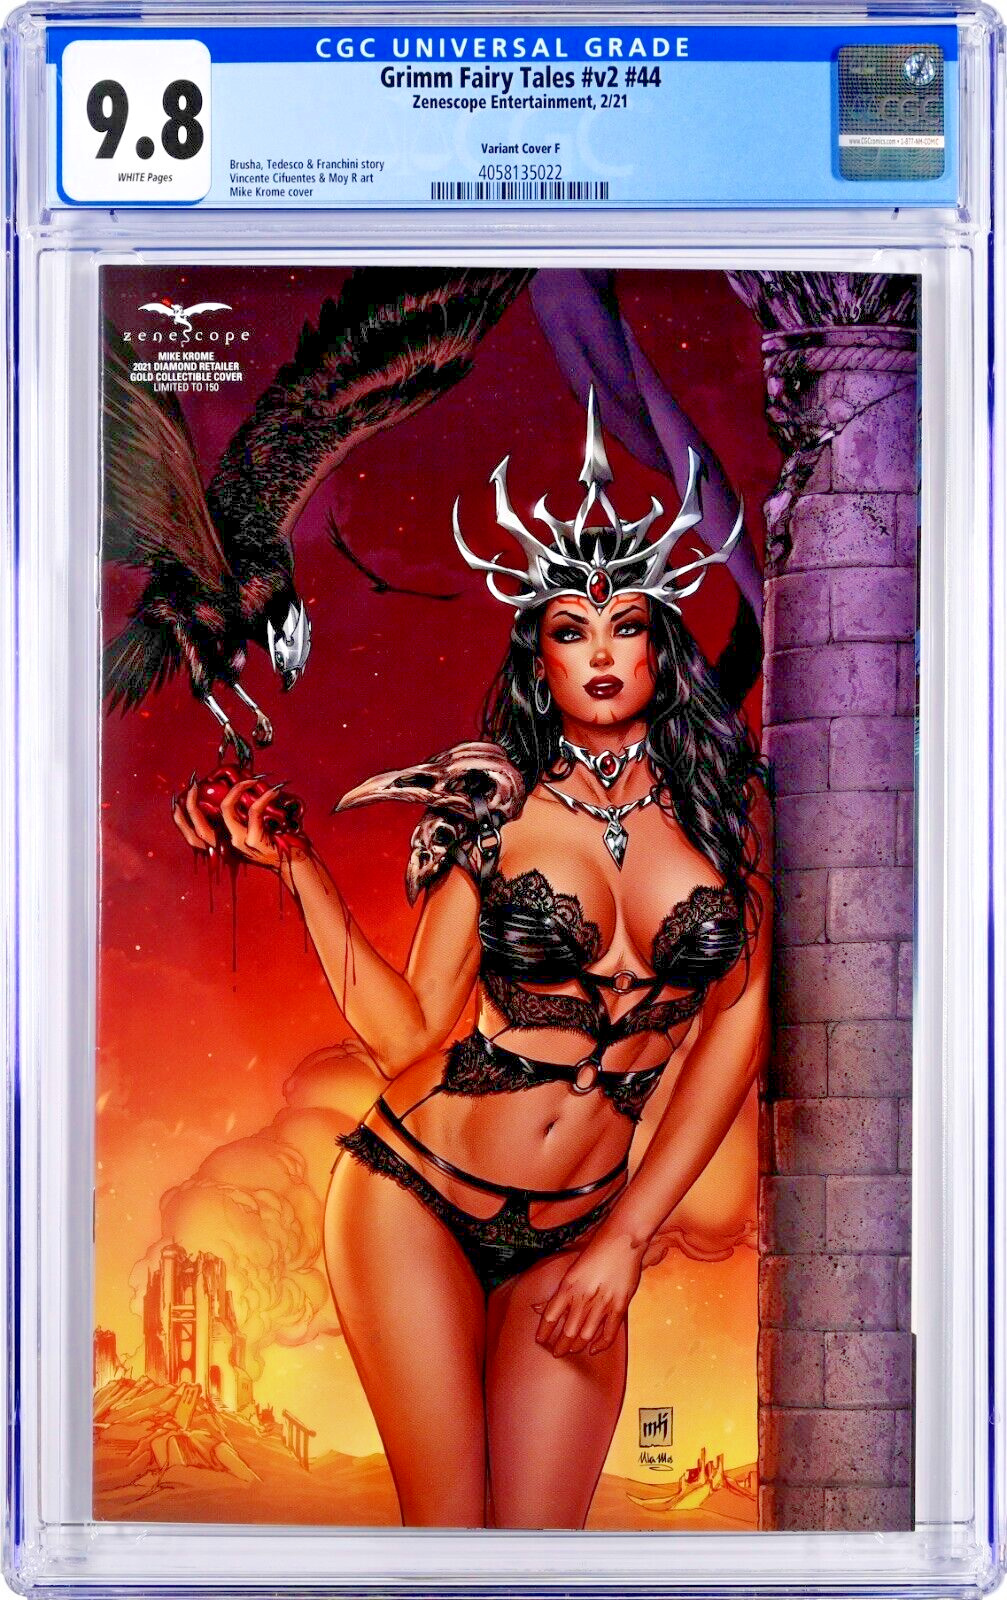 Grimm Fairy Tales v2 #44 CGC 9.8 (2021, Zenescope) Mike Krome Variant Cover F